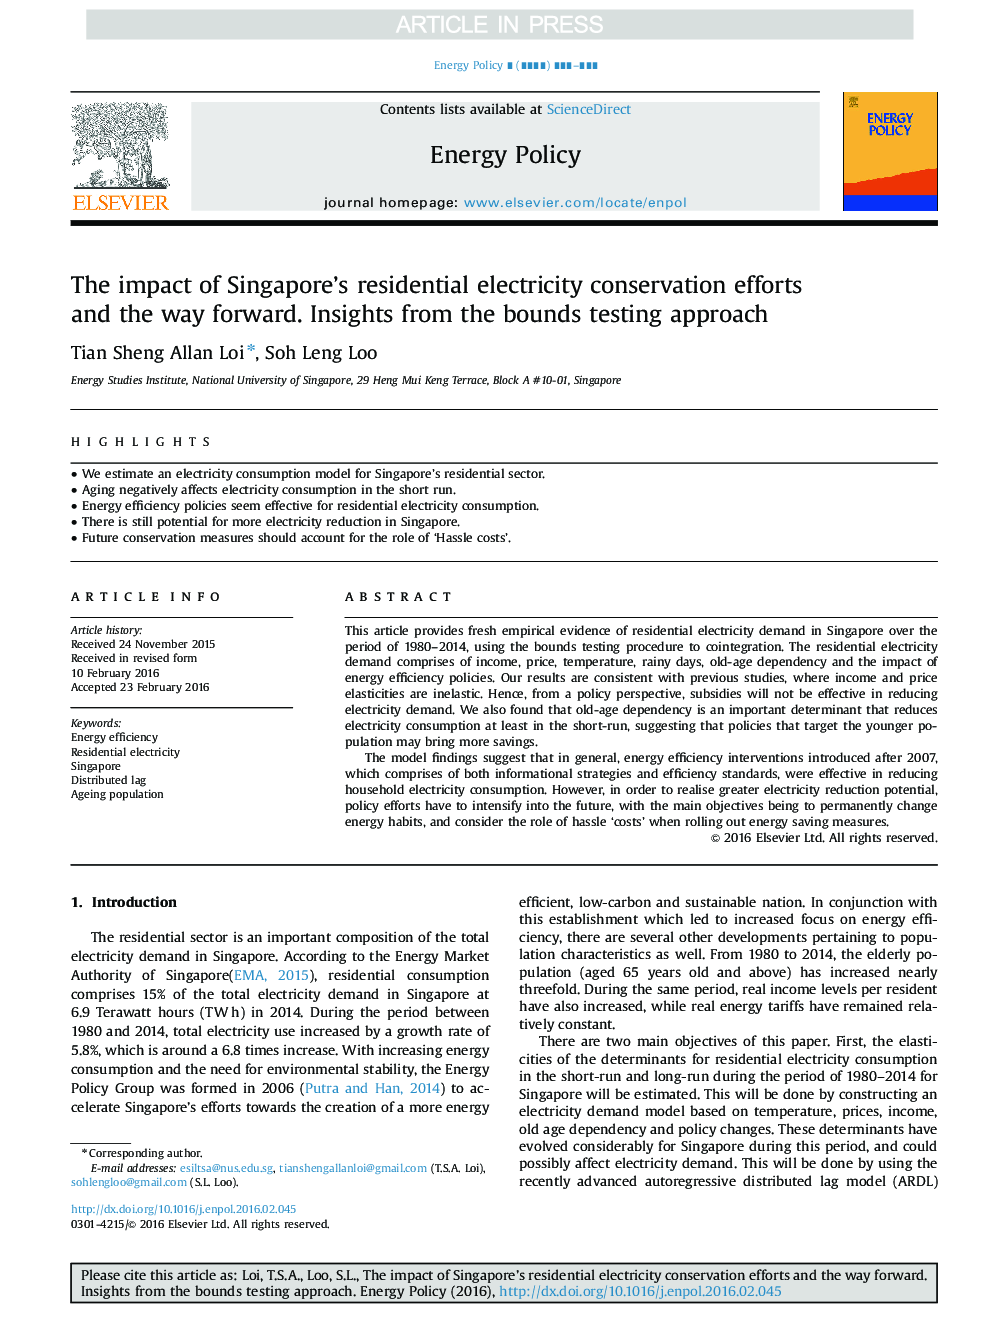 The impact of Singapore's residential electricity conservation efforts and the way forward. Insights from the bounds testing approach